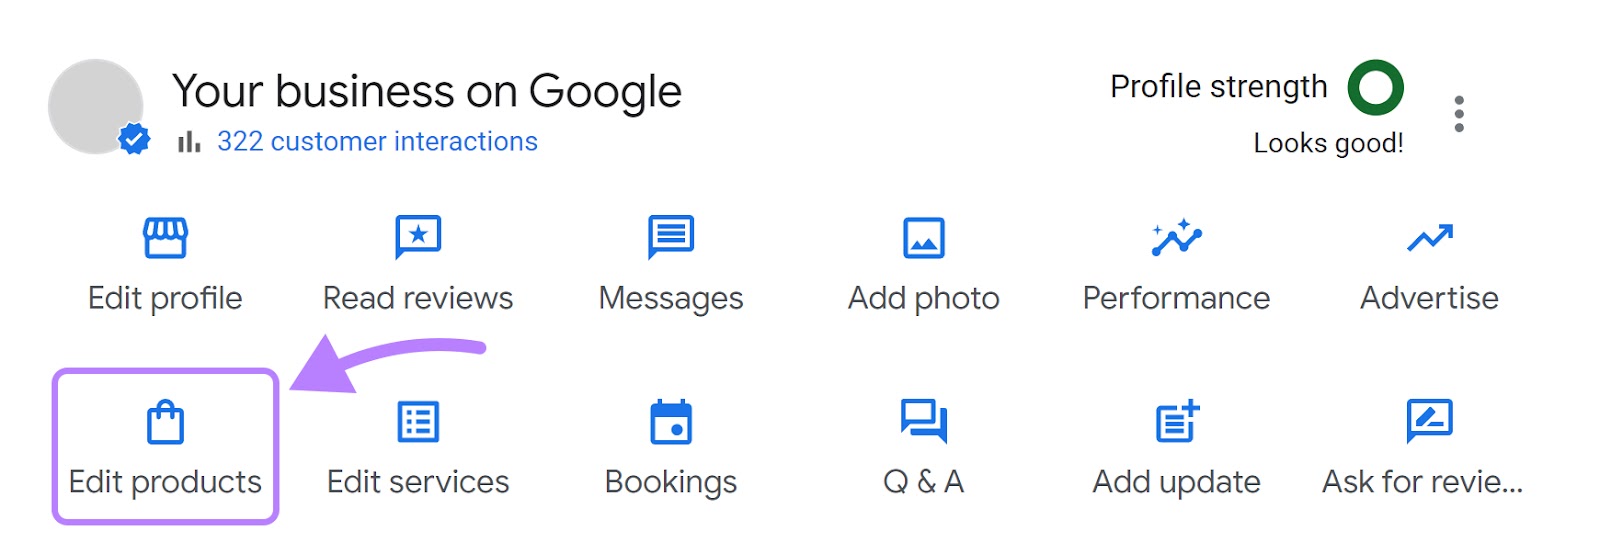 “Edit products” button selected on Google My Business dashboard